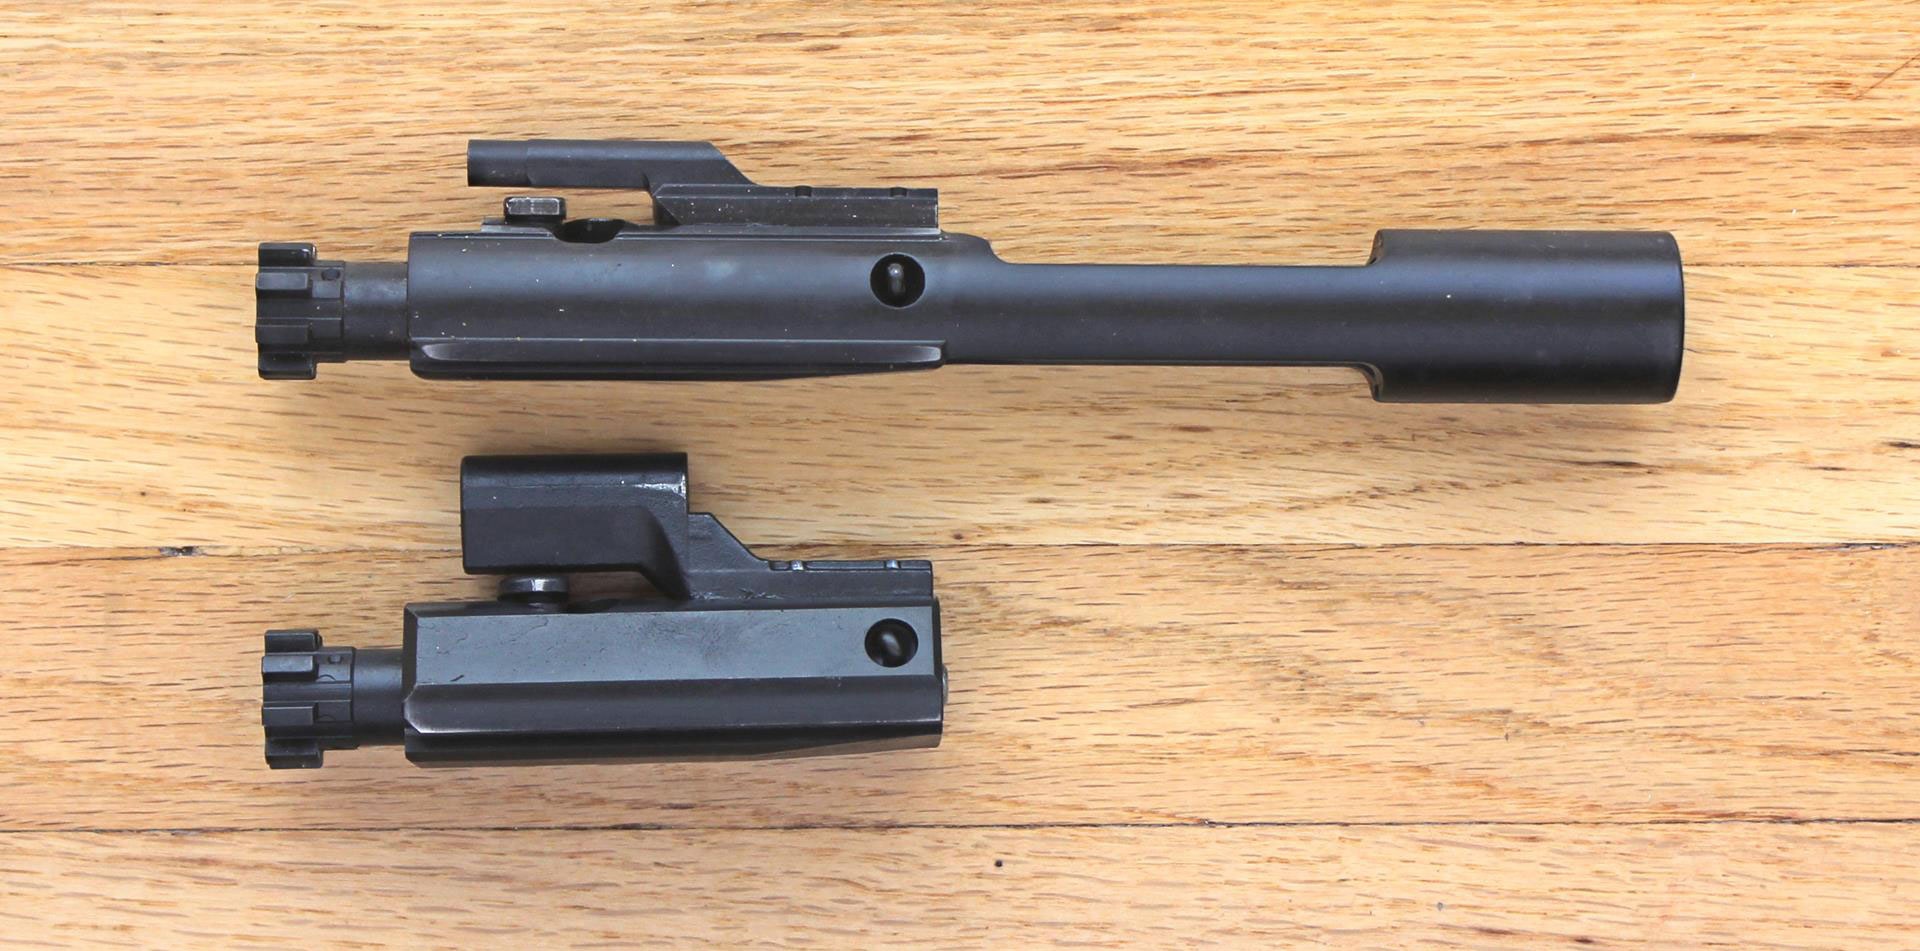 A typical AR-15 BCG (Top) compared to the FM-15 BCG (Bottom).